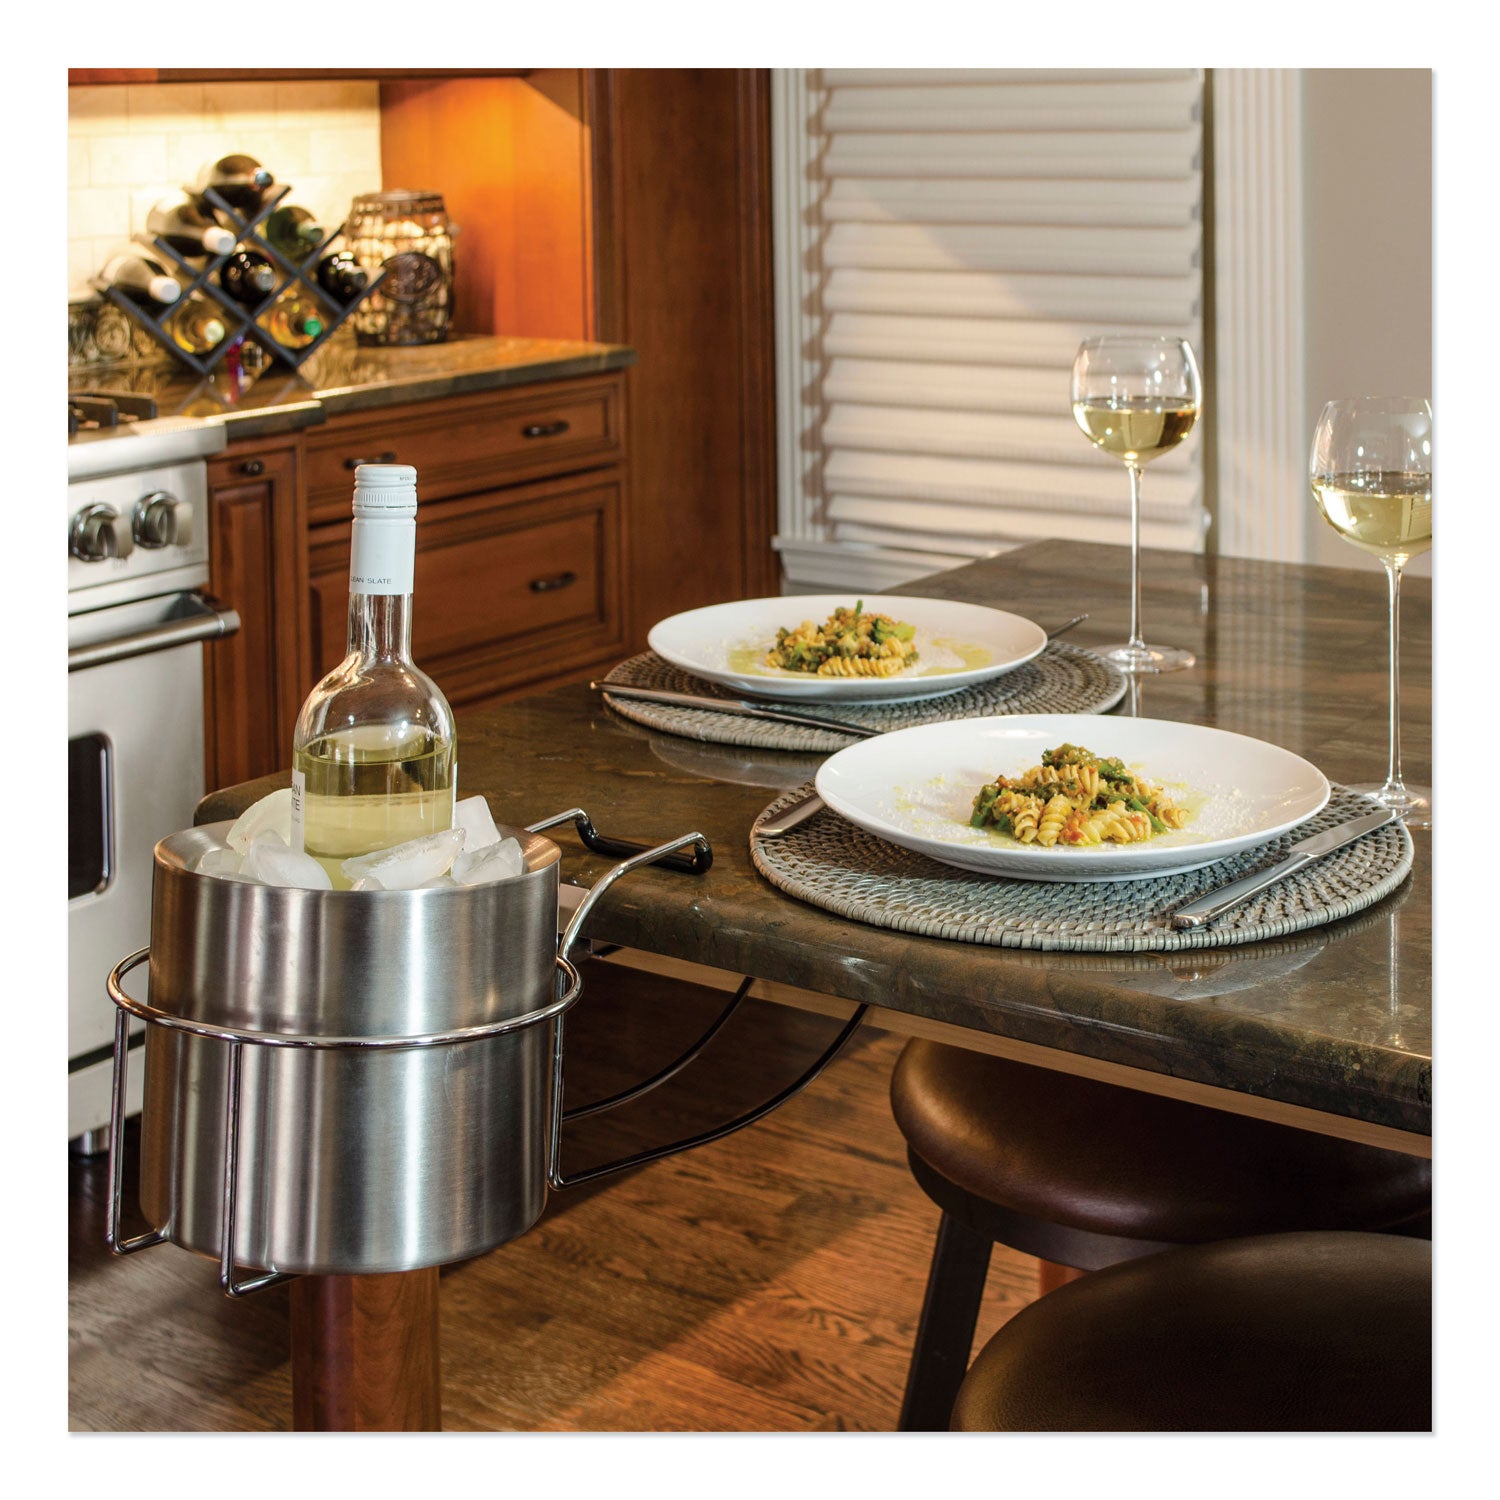 wine-by-your-side-steel-frame-red-wine-adapter-ice-bucket-16106-cu-in-stainless-steel_cli20014 - 1